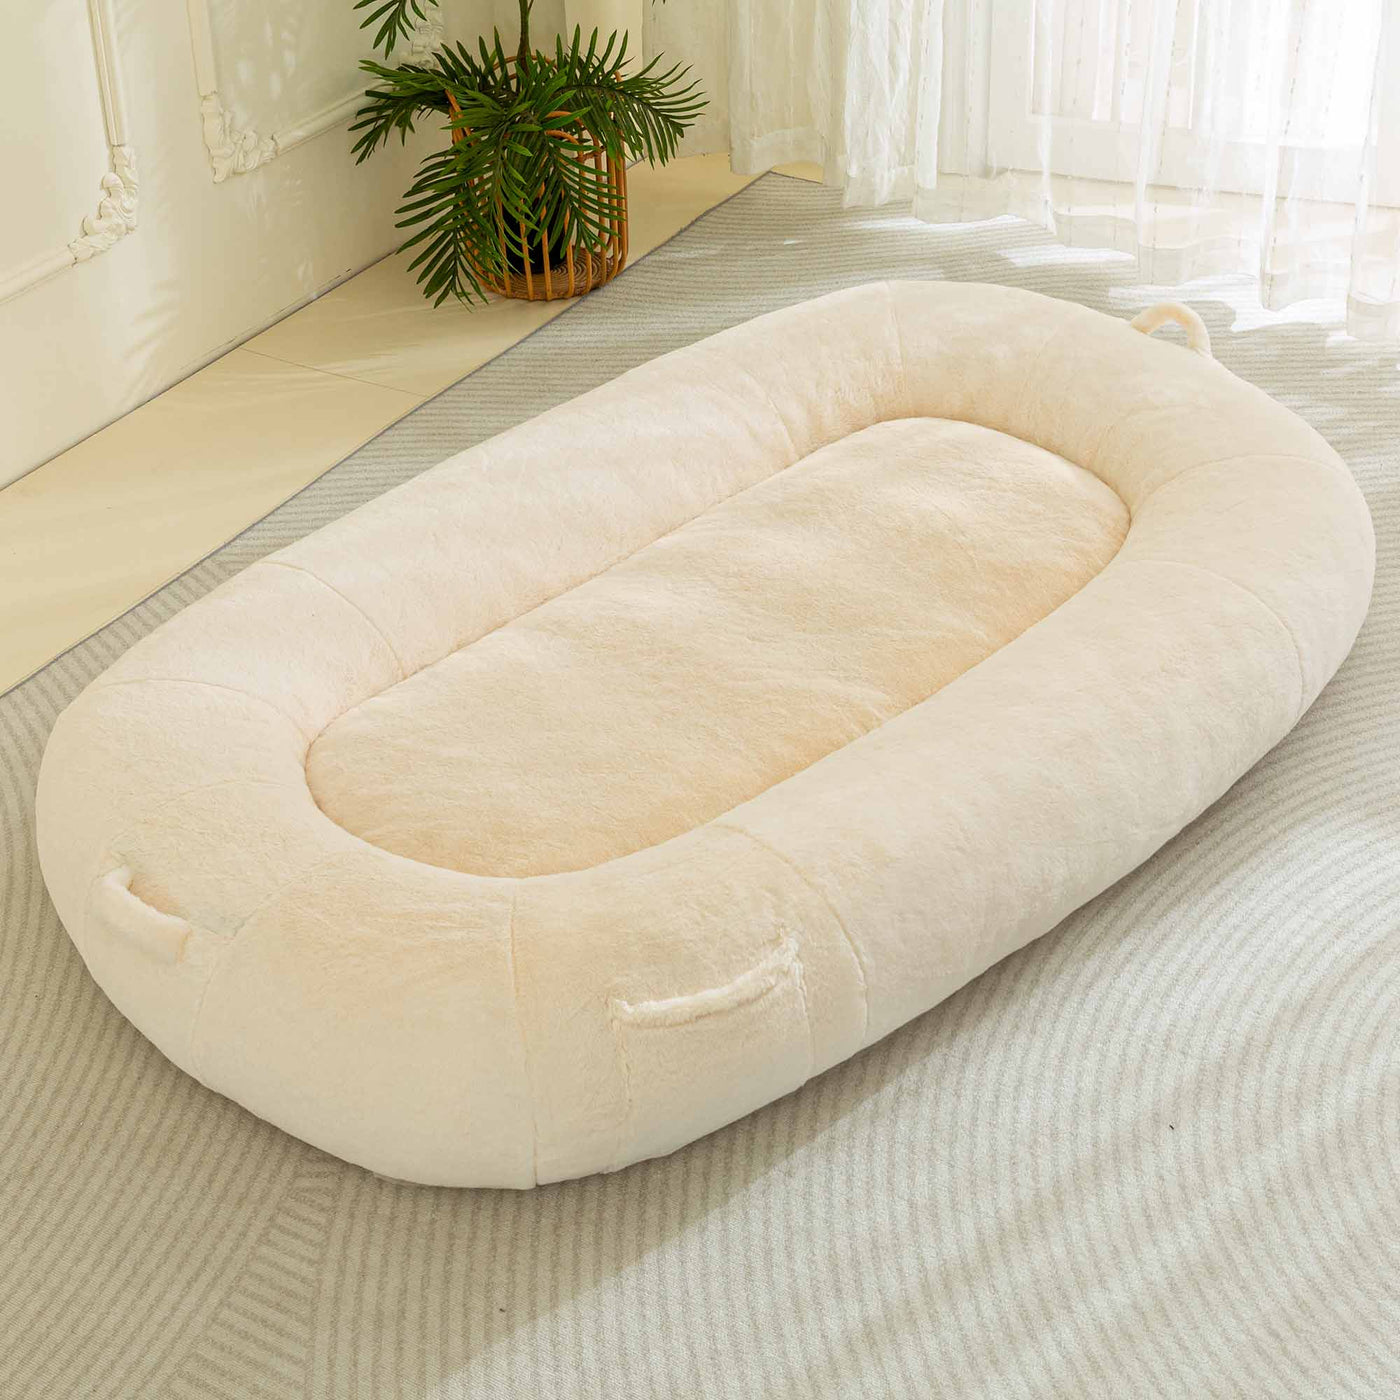 MAXYOYO Human Dog Bed, Faux Fur Giant Bean Bag Bed for Humans and Pets, Beige